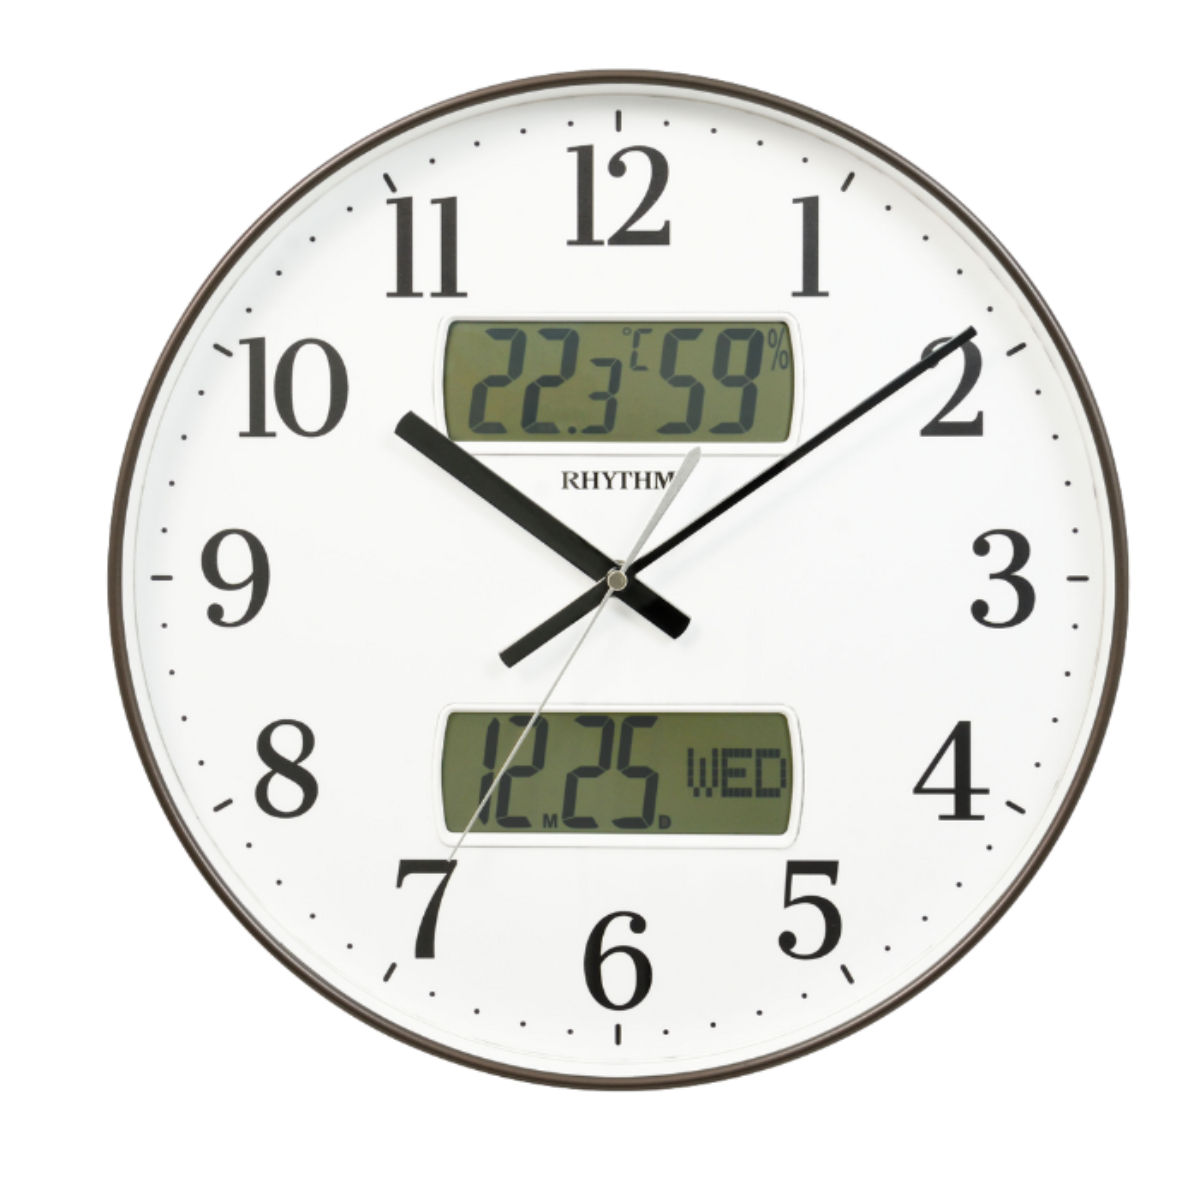 Rhythm CFG724NR06 Value Added Silent Silky Move Wall Clock (Singapore Only)